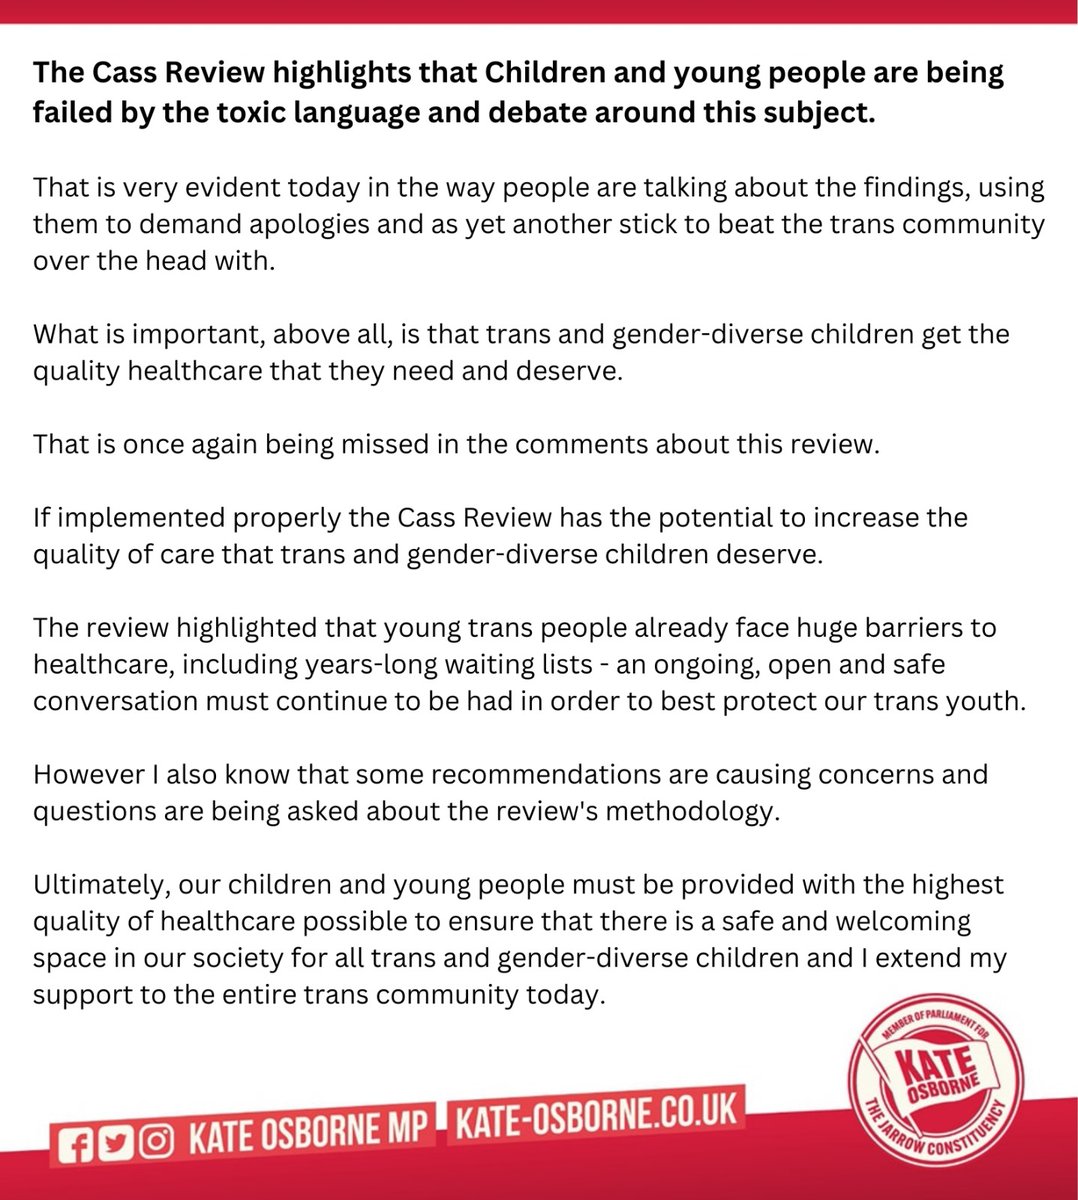 The Cass Review highlights that Children & young people are being failed by toxic language & debate around this subject. Trans and gender-diverse children must get the quality healthcare that they need and deserve. I extend my support to the entire trans community today 👇